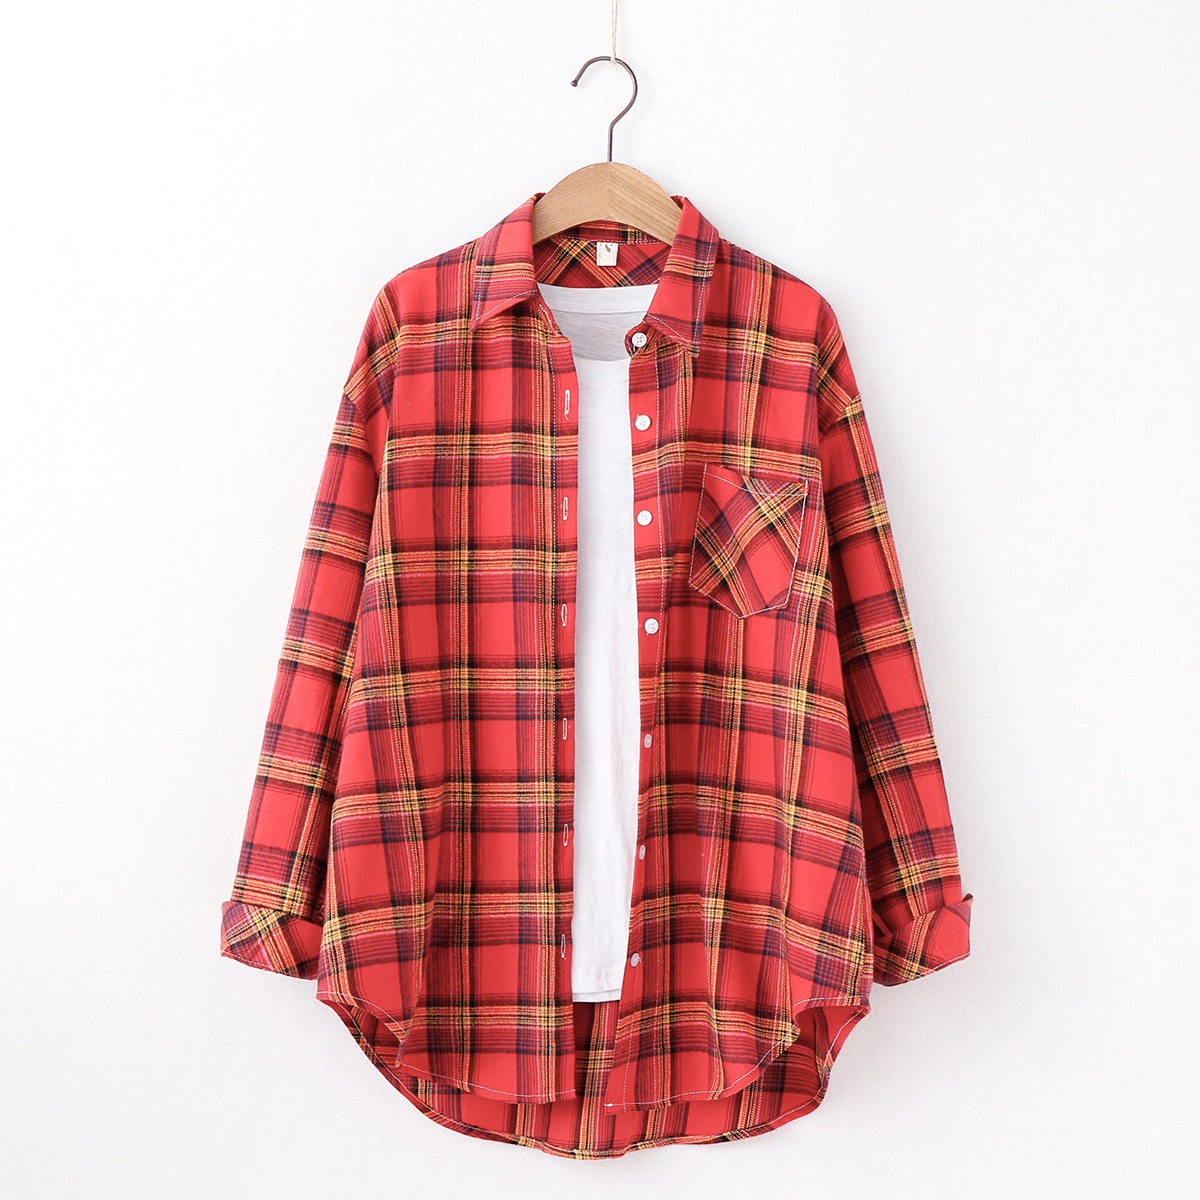 2021 New 90s Plaid Shirt Casual Outfit JKP4515